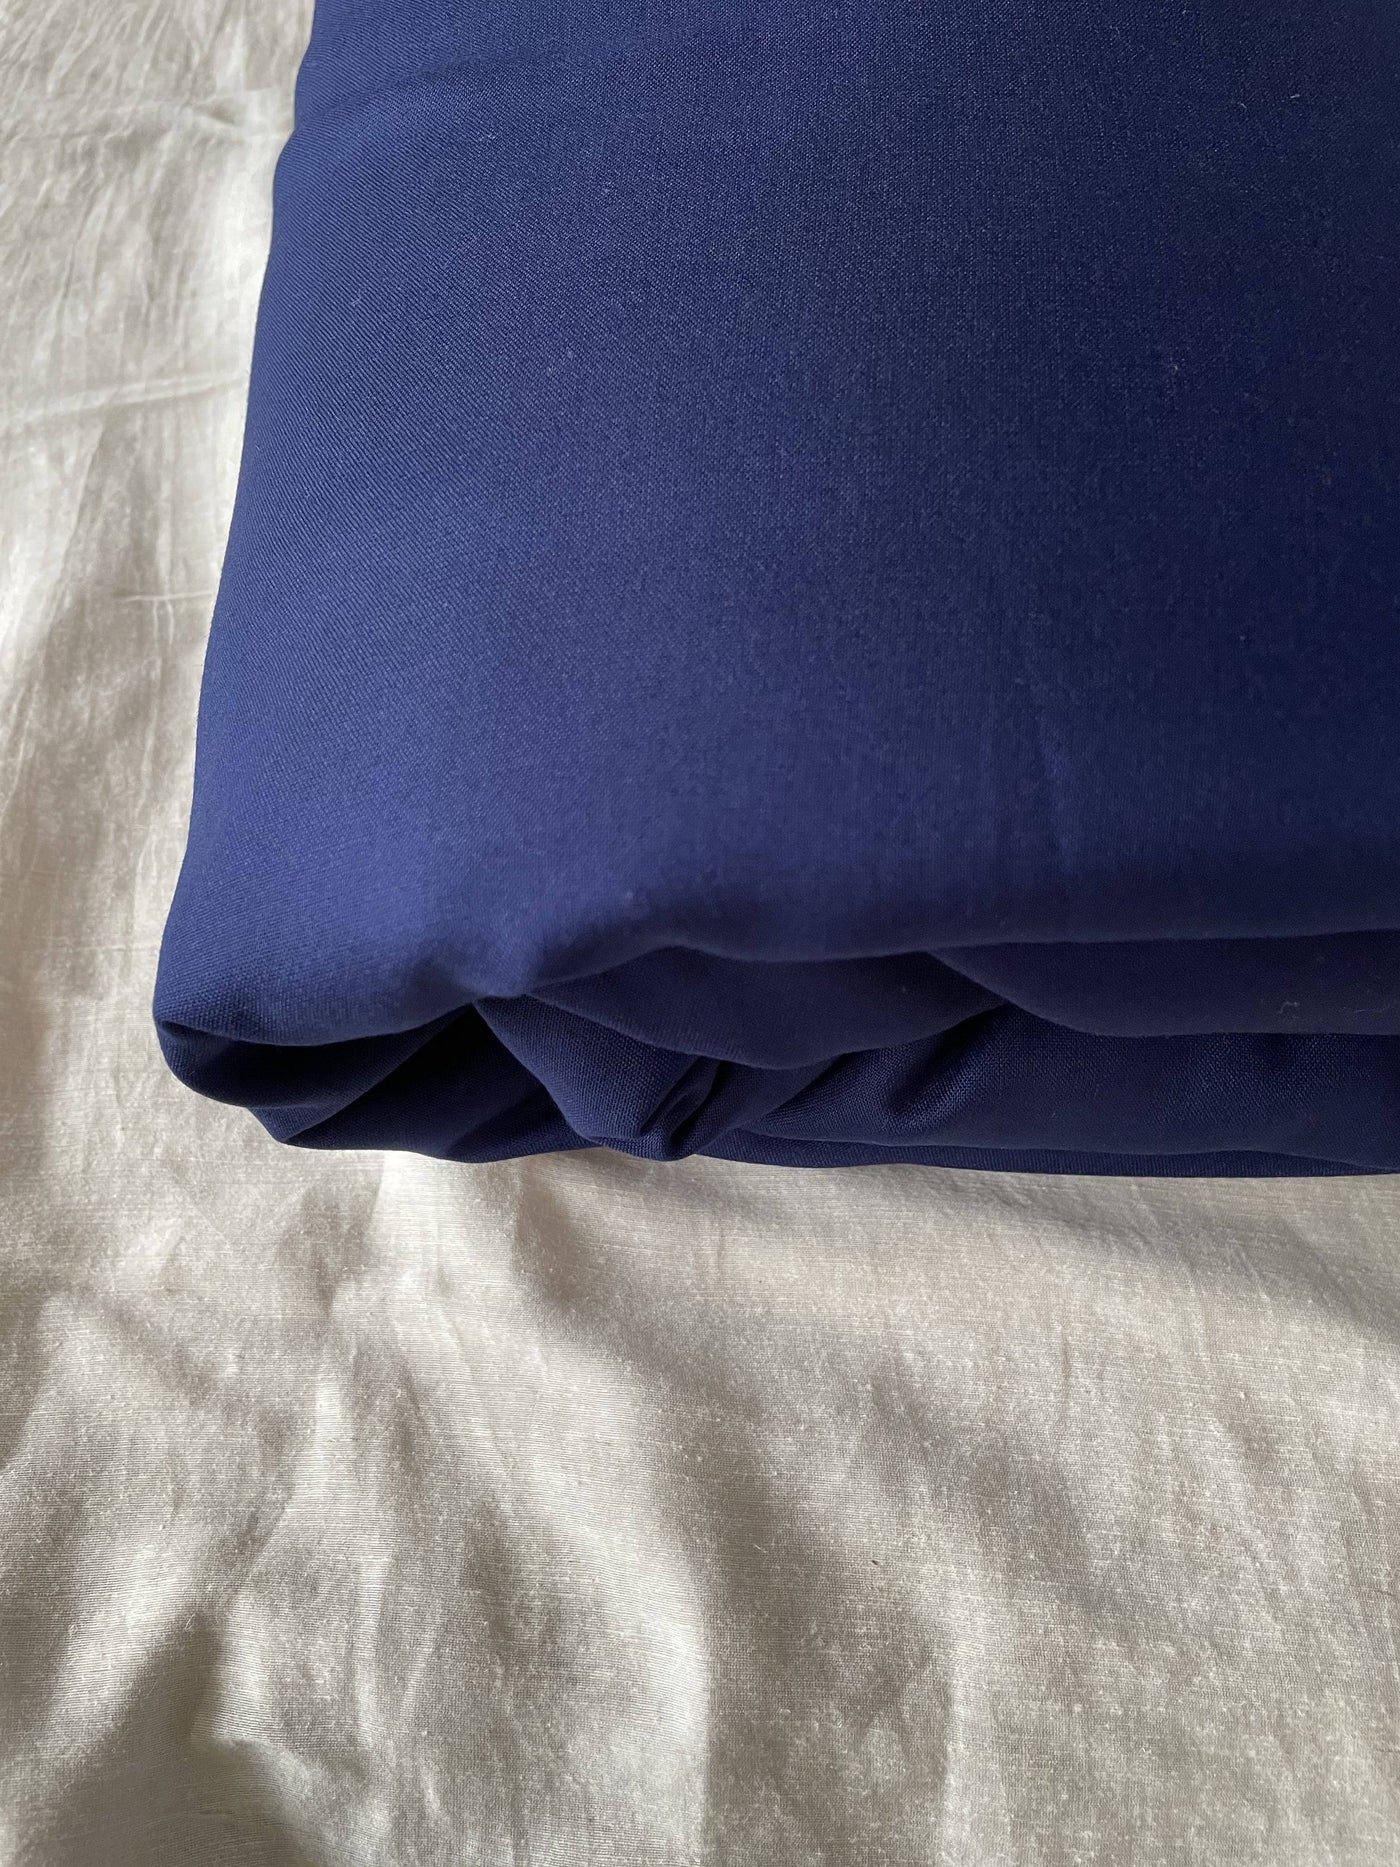 Essentials by Fabric Pandit Fabric Midnight Blue Color Pure Rayon Fabric